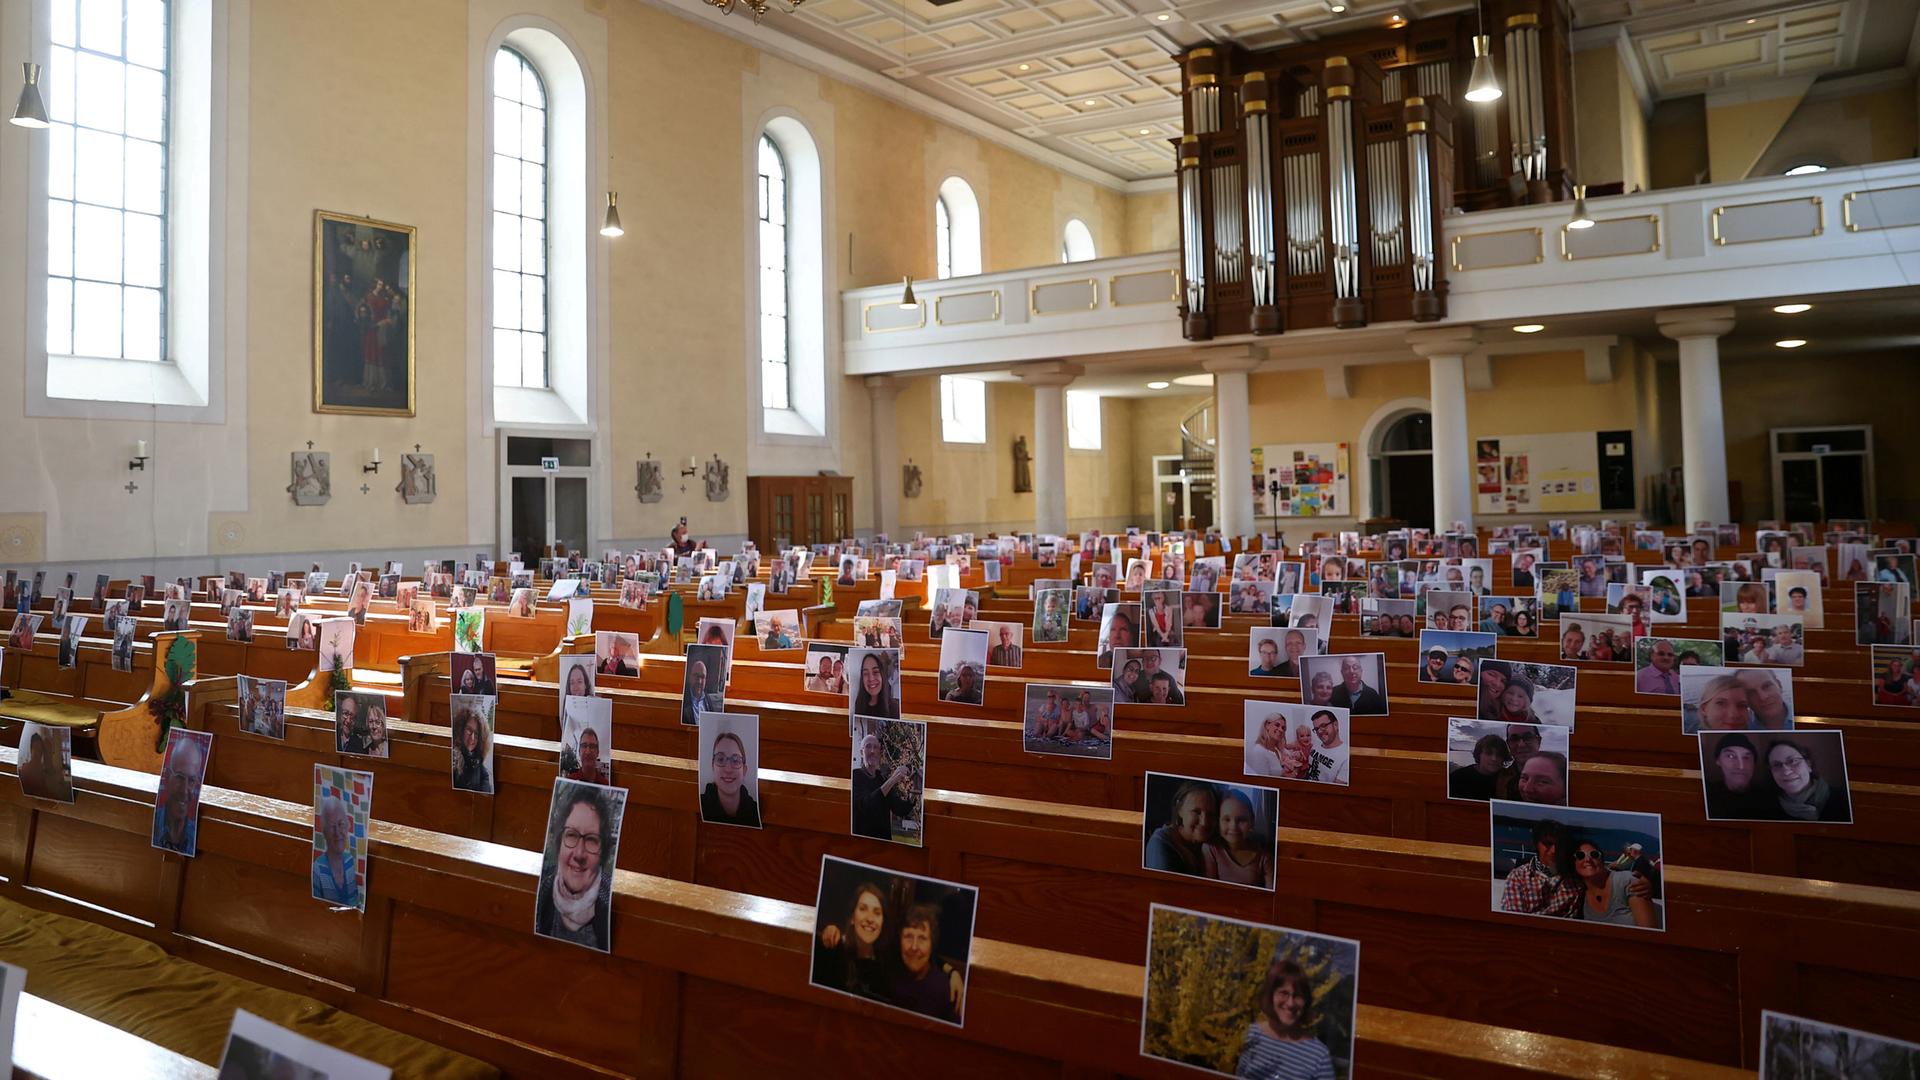 A church sanctuary is shown with empty rows of pews and the photos of people's faces taped to the back rest.